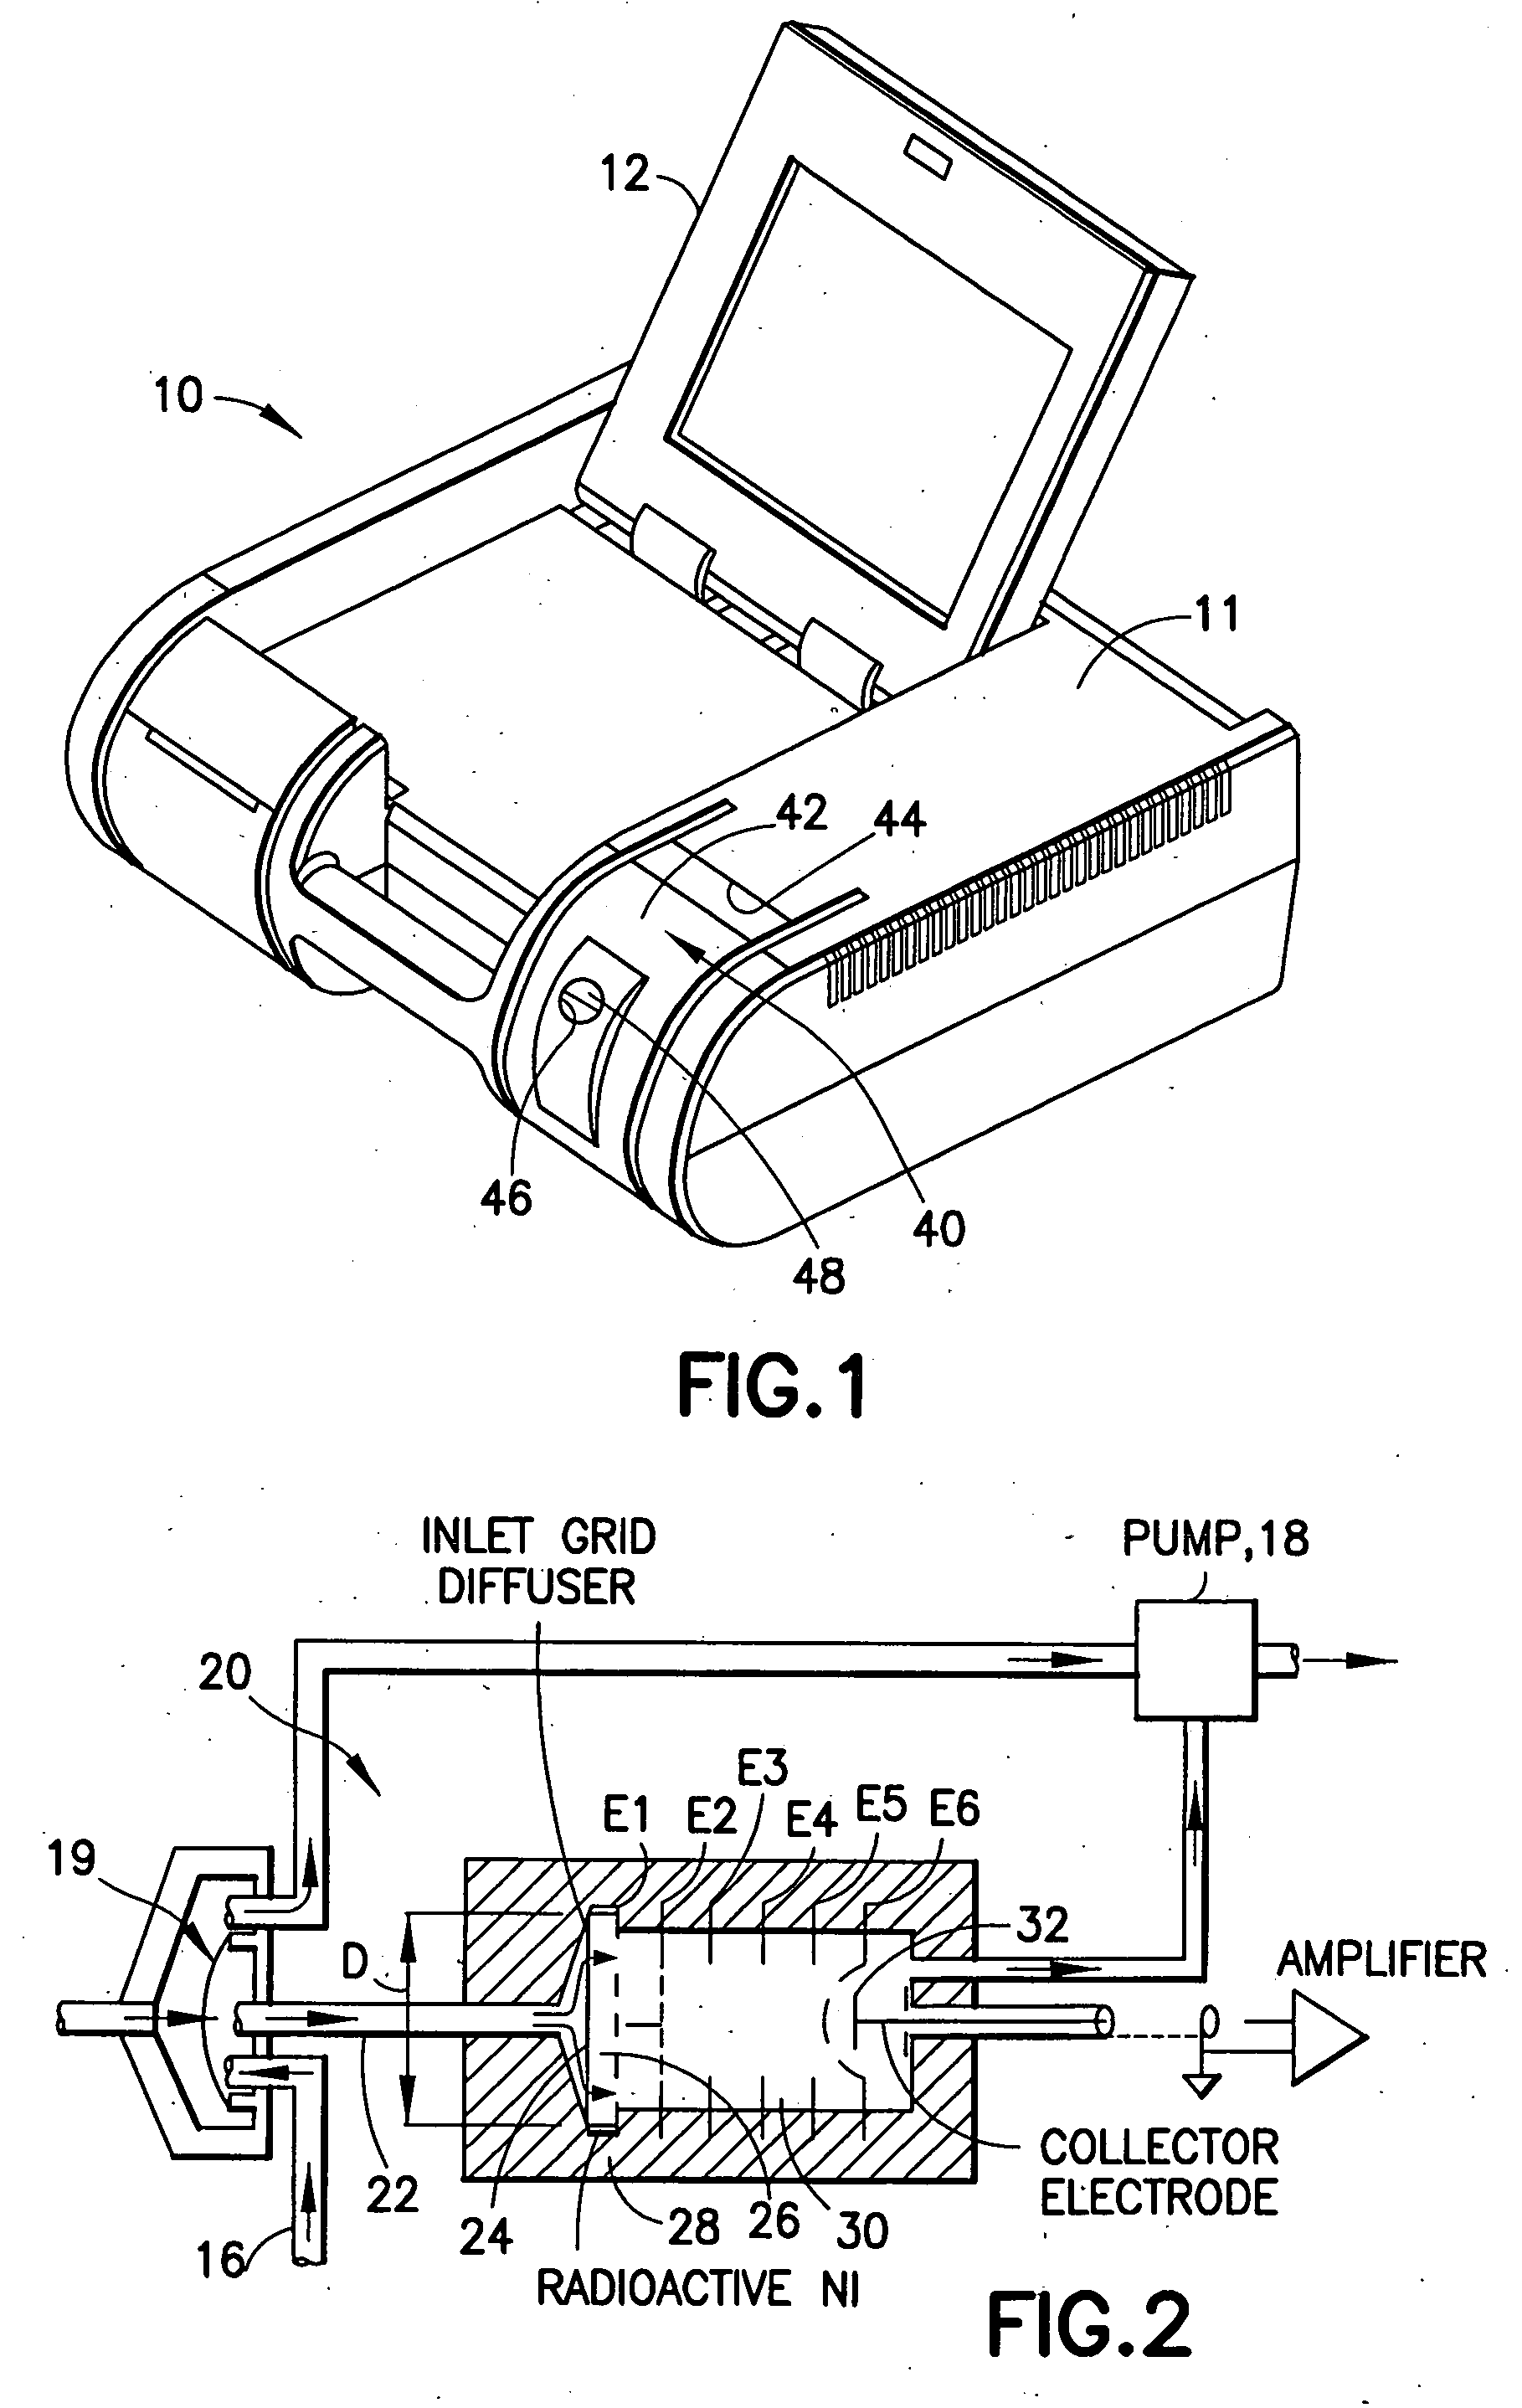 Calibration and verification tool and method for calibrating a detection apparatus